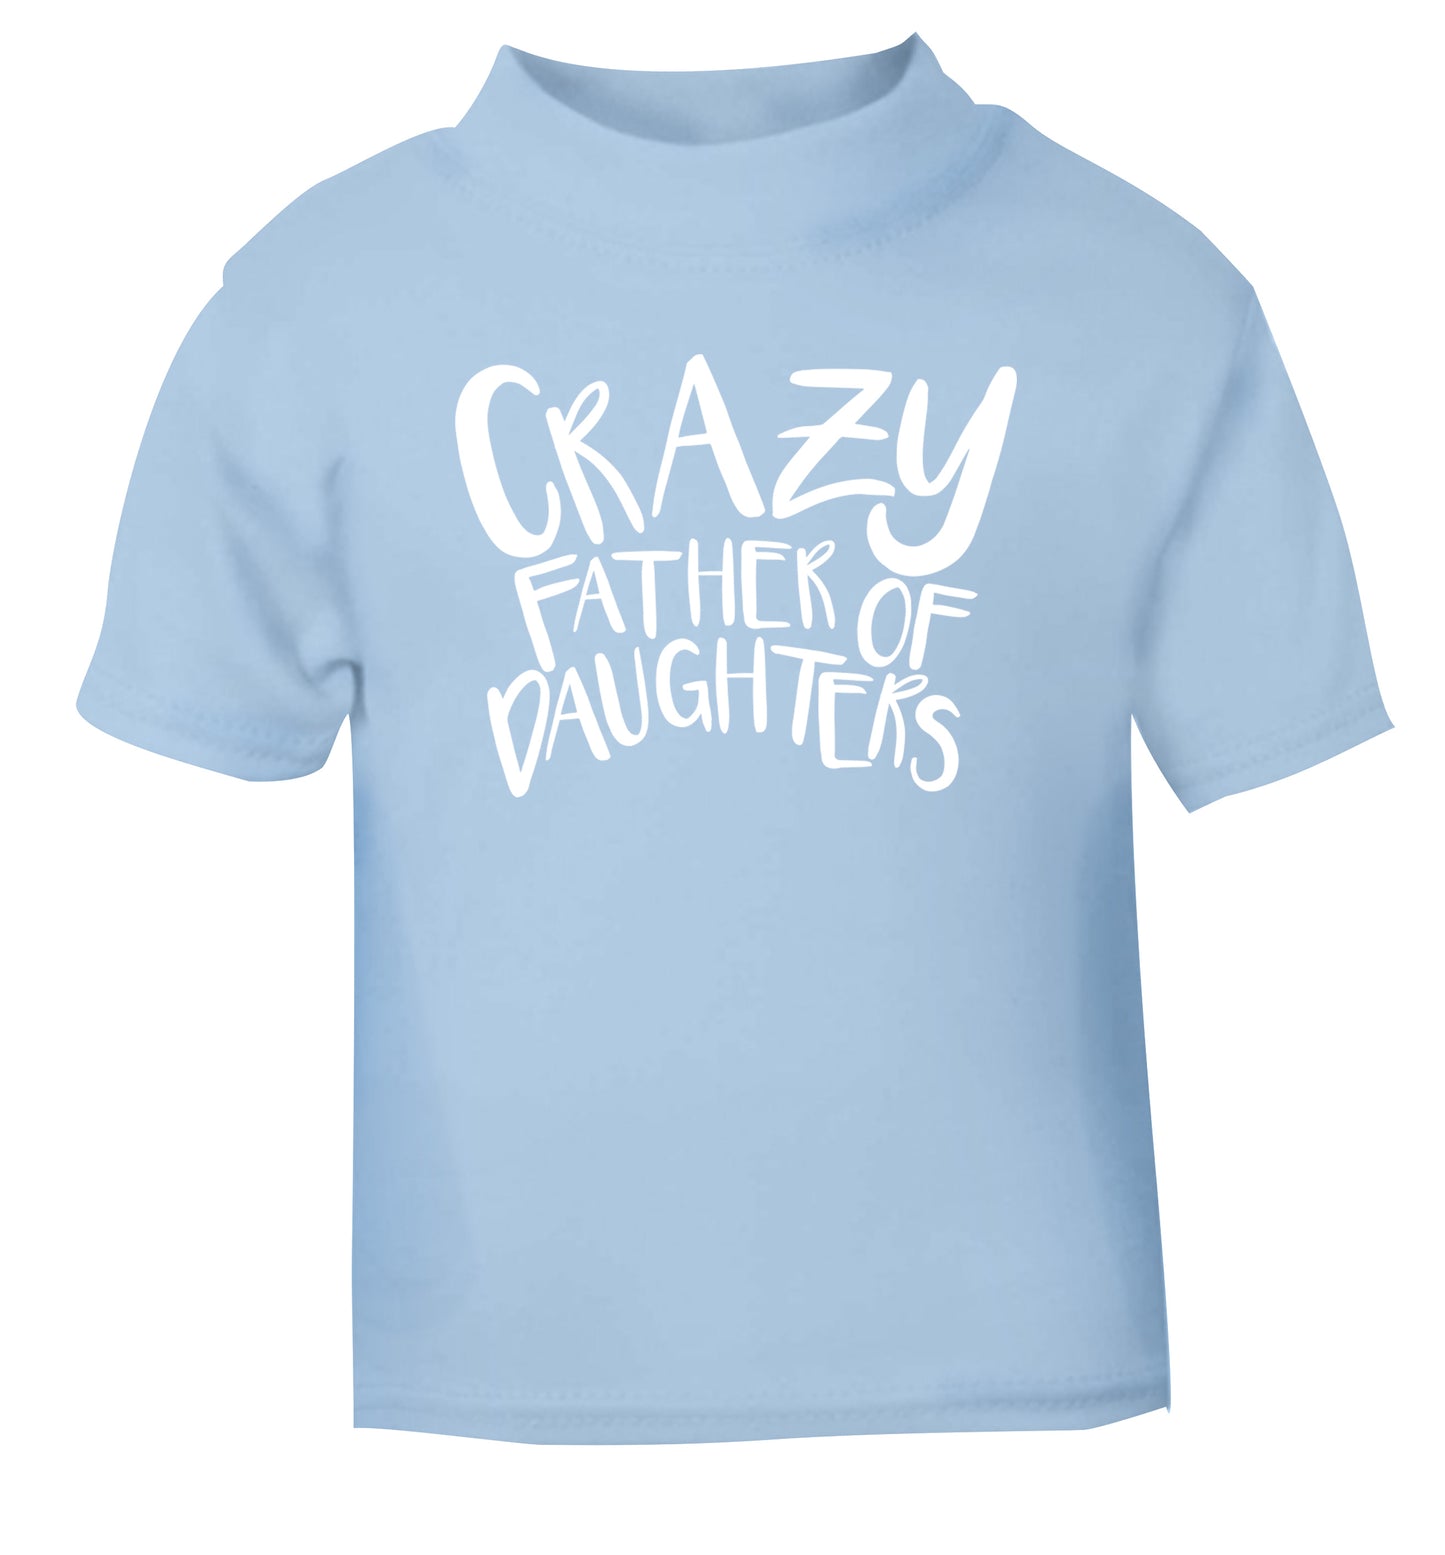 Crazy father of daughters light blue Baby Toddler Tshirt 2 Years